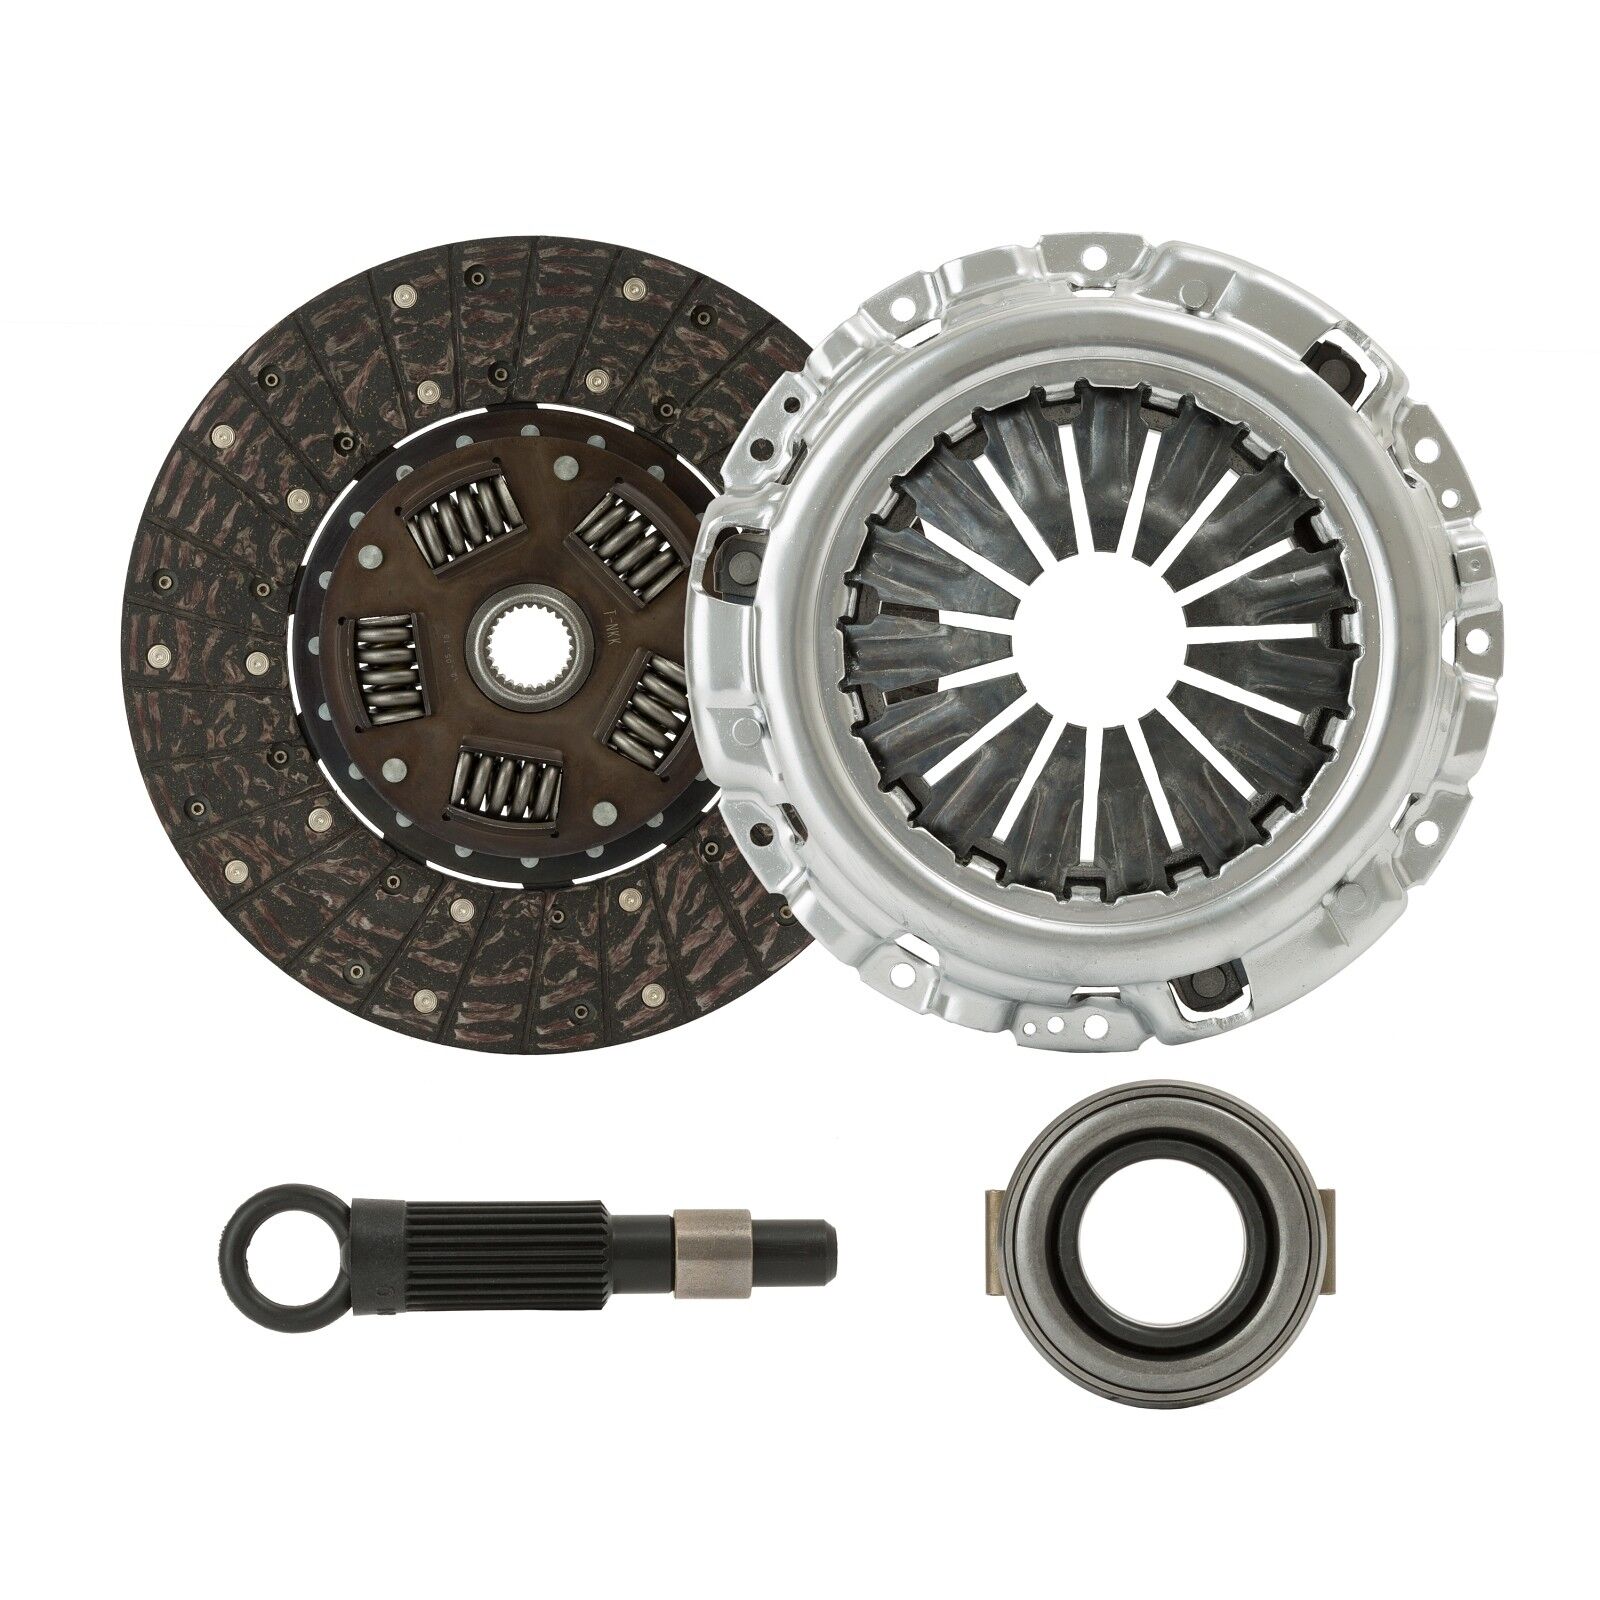 CLUTCHXPERTS Max 54% OFF OE CLUTCH KIT SET fits SOL DEL SI INTEGRA Our shop OFFers the best service VTE CIVIC